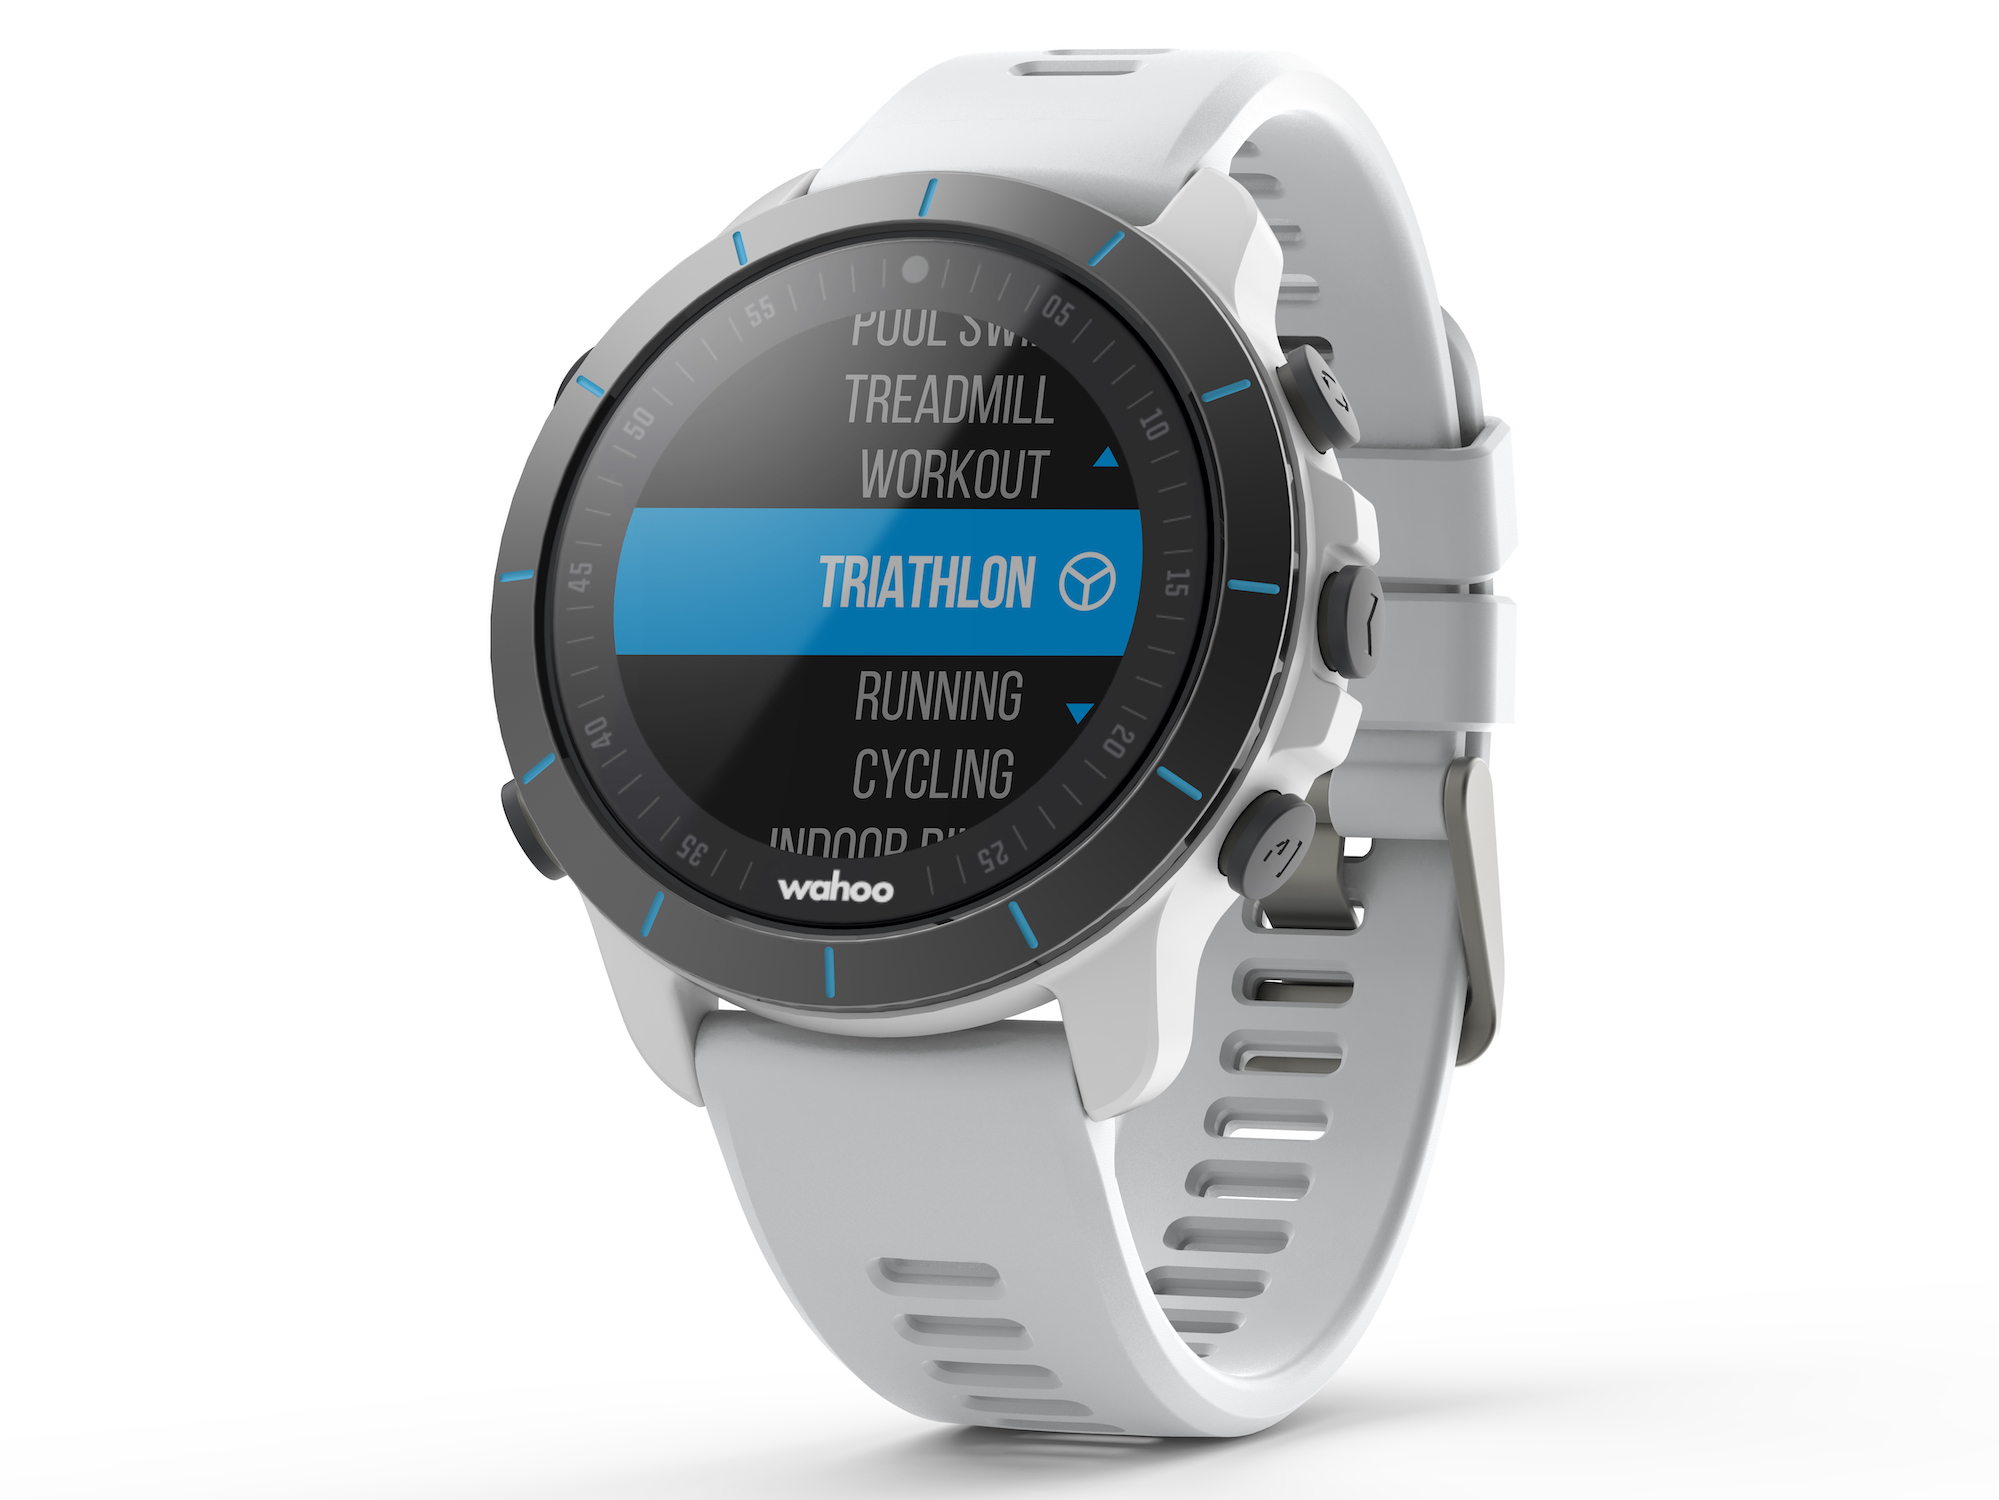 This new workout watch can tell when you switch activities